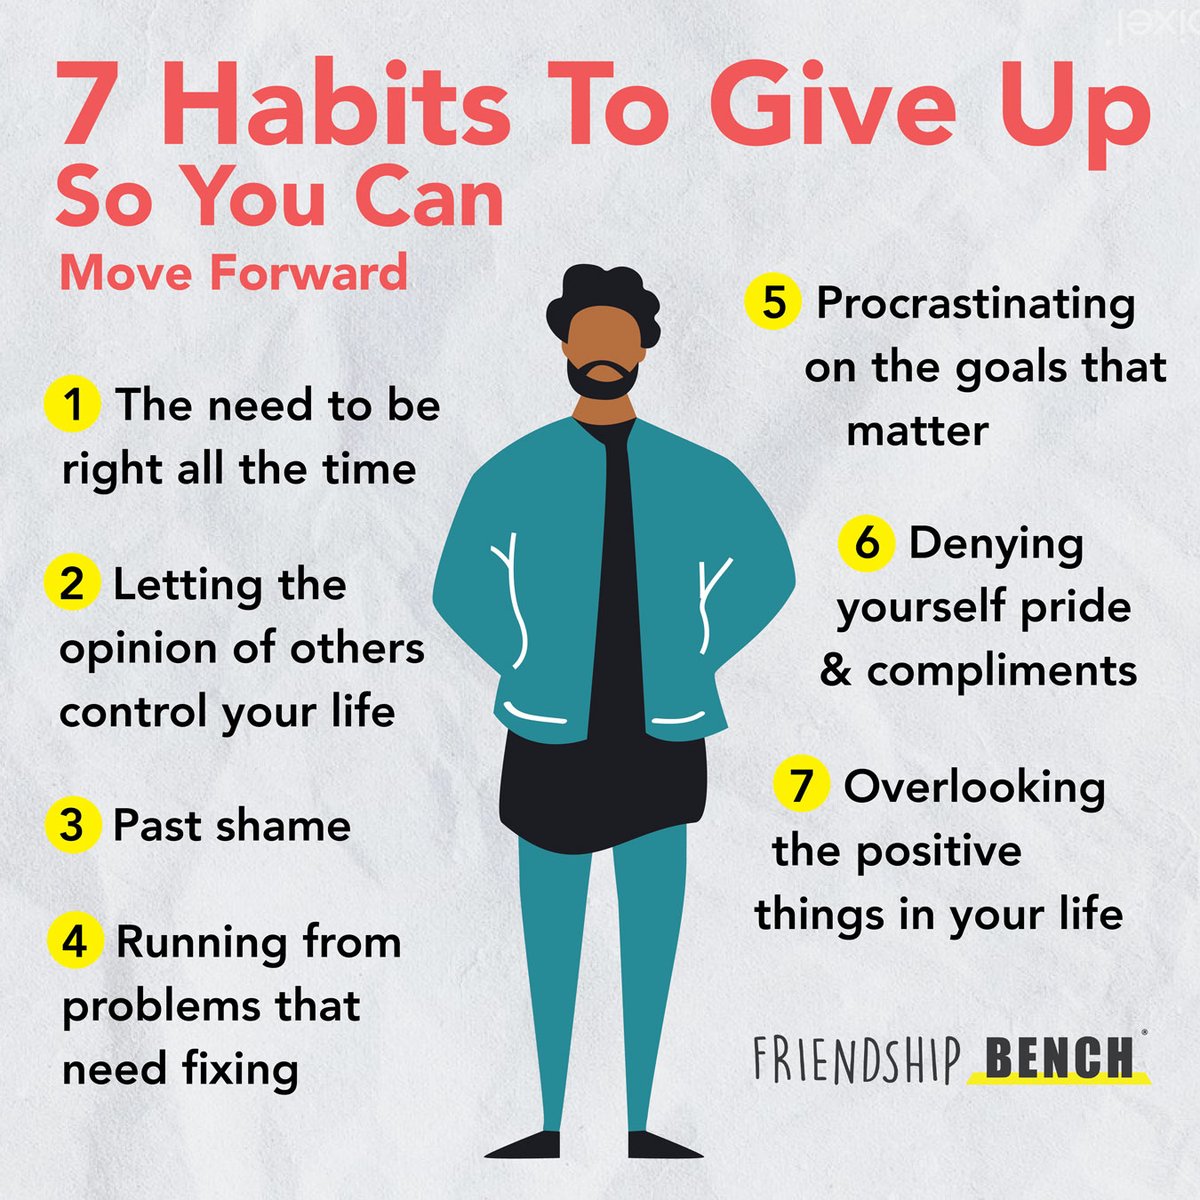 It's easy to find ourselves lost, going through the day but feeling empty & numb. In these times....

🙃 STOP
🪑 Take a seat
📝 Get a note pad & pen
✏️ Of the 7 points below, which are unhelpful habits in your life? List them.
💭 What action can you take to break the habits?